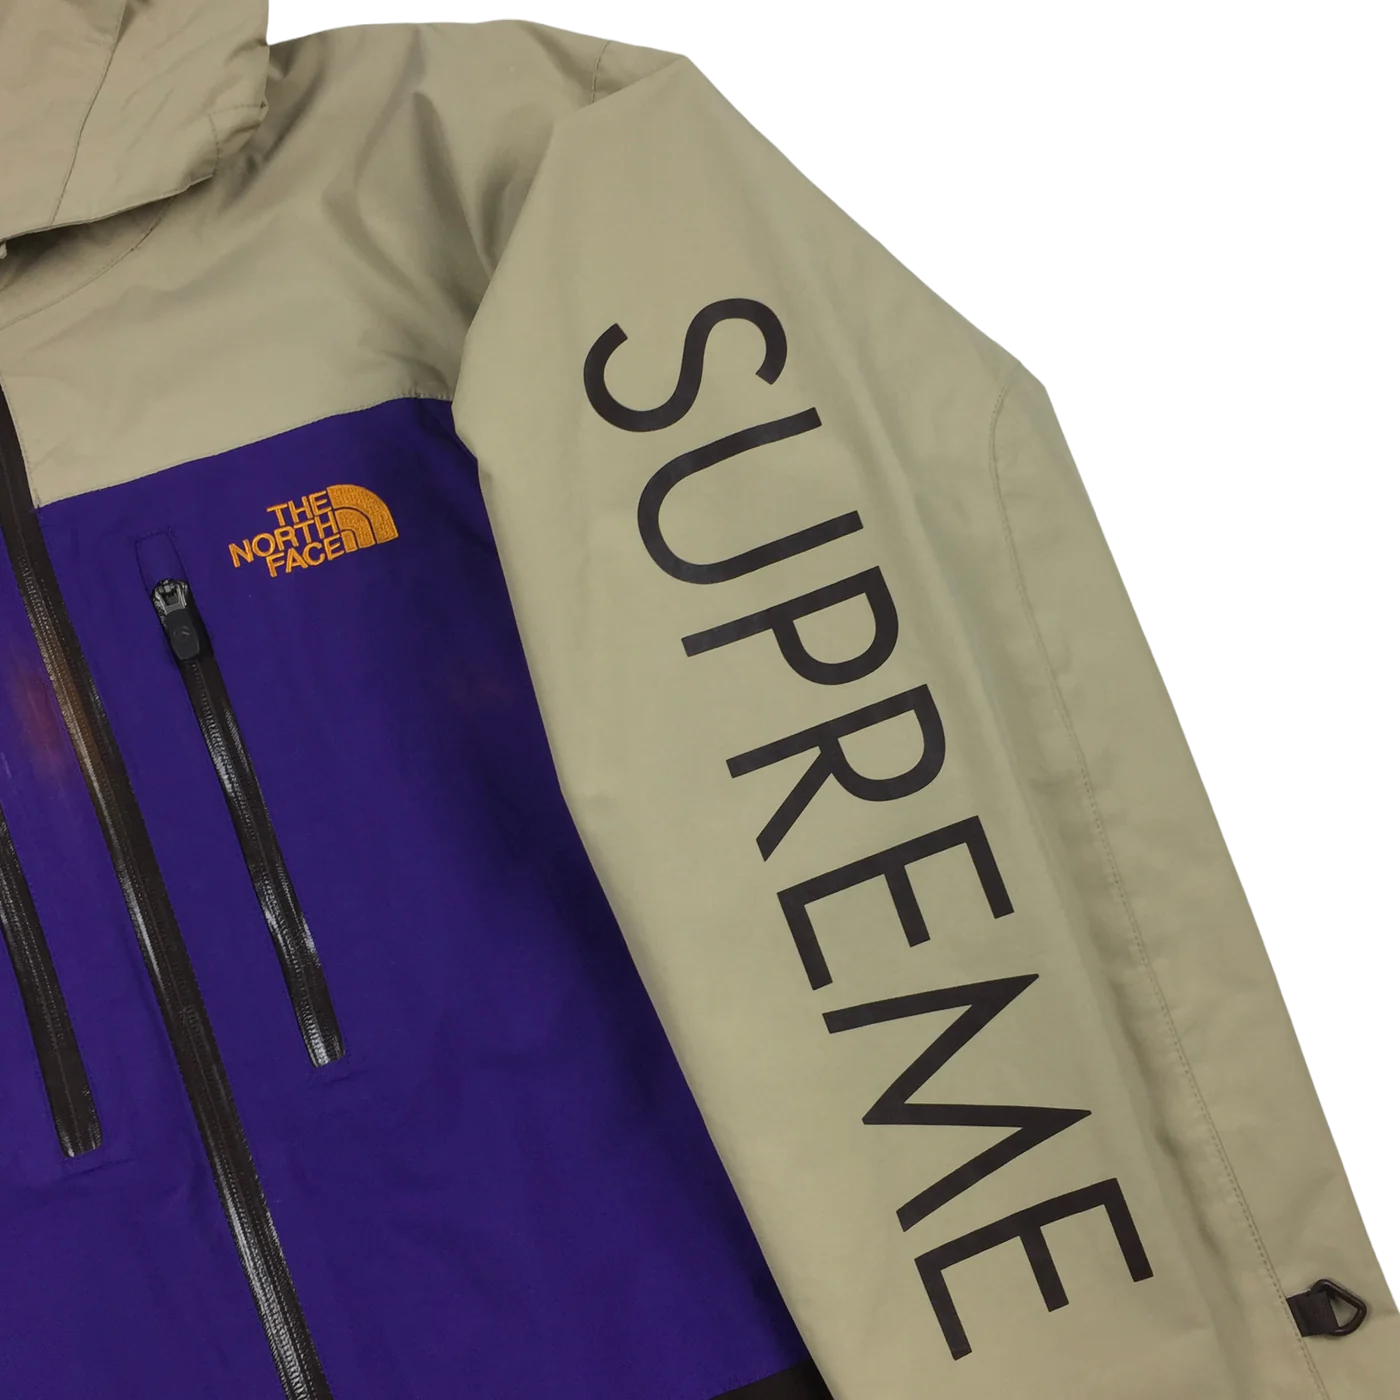 2007 Supreme x The North Face 1st Series Tan